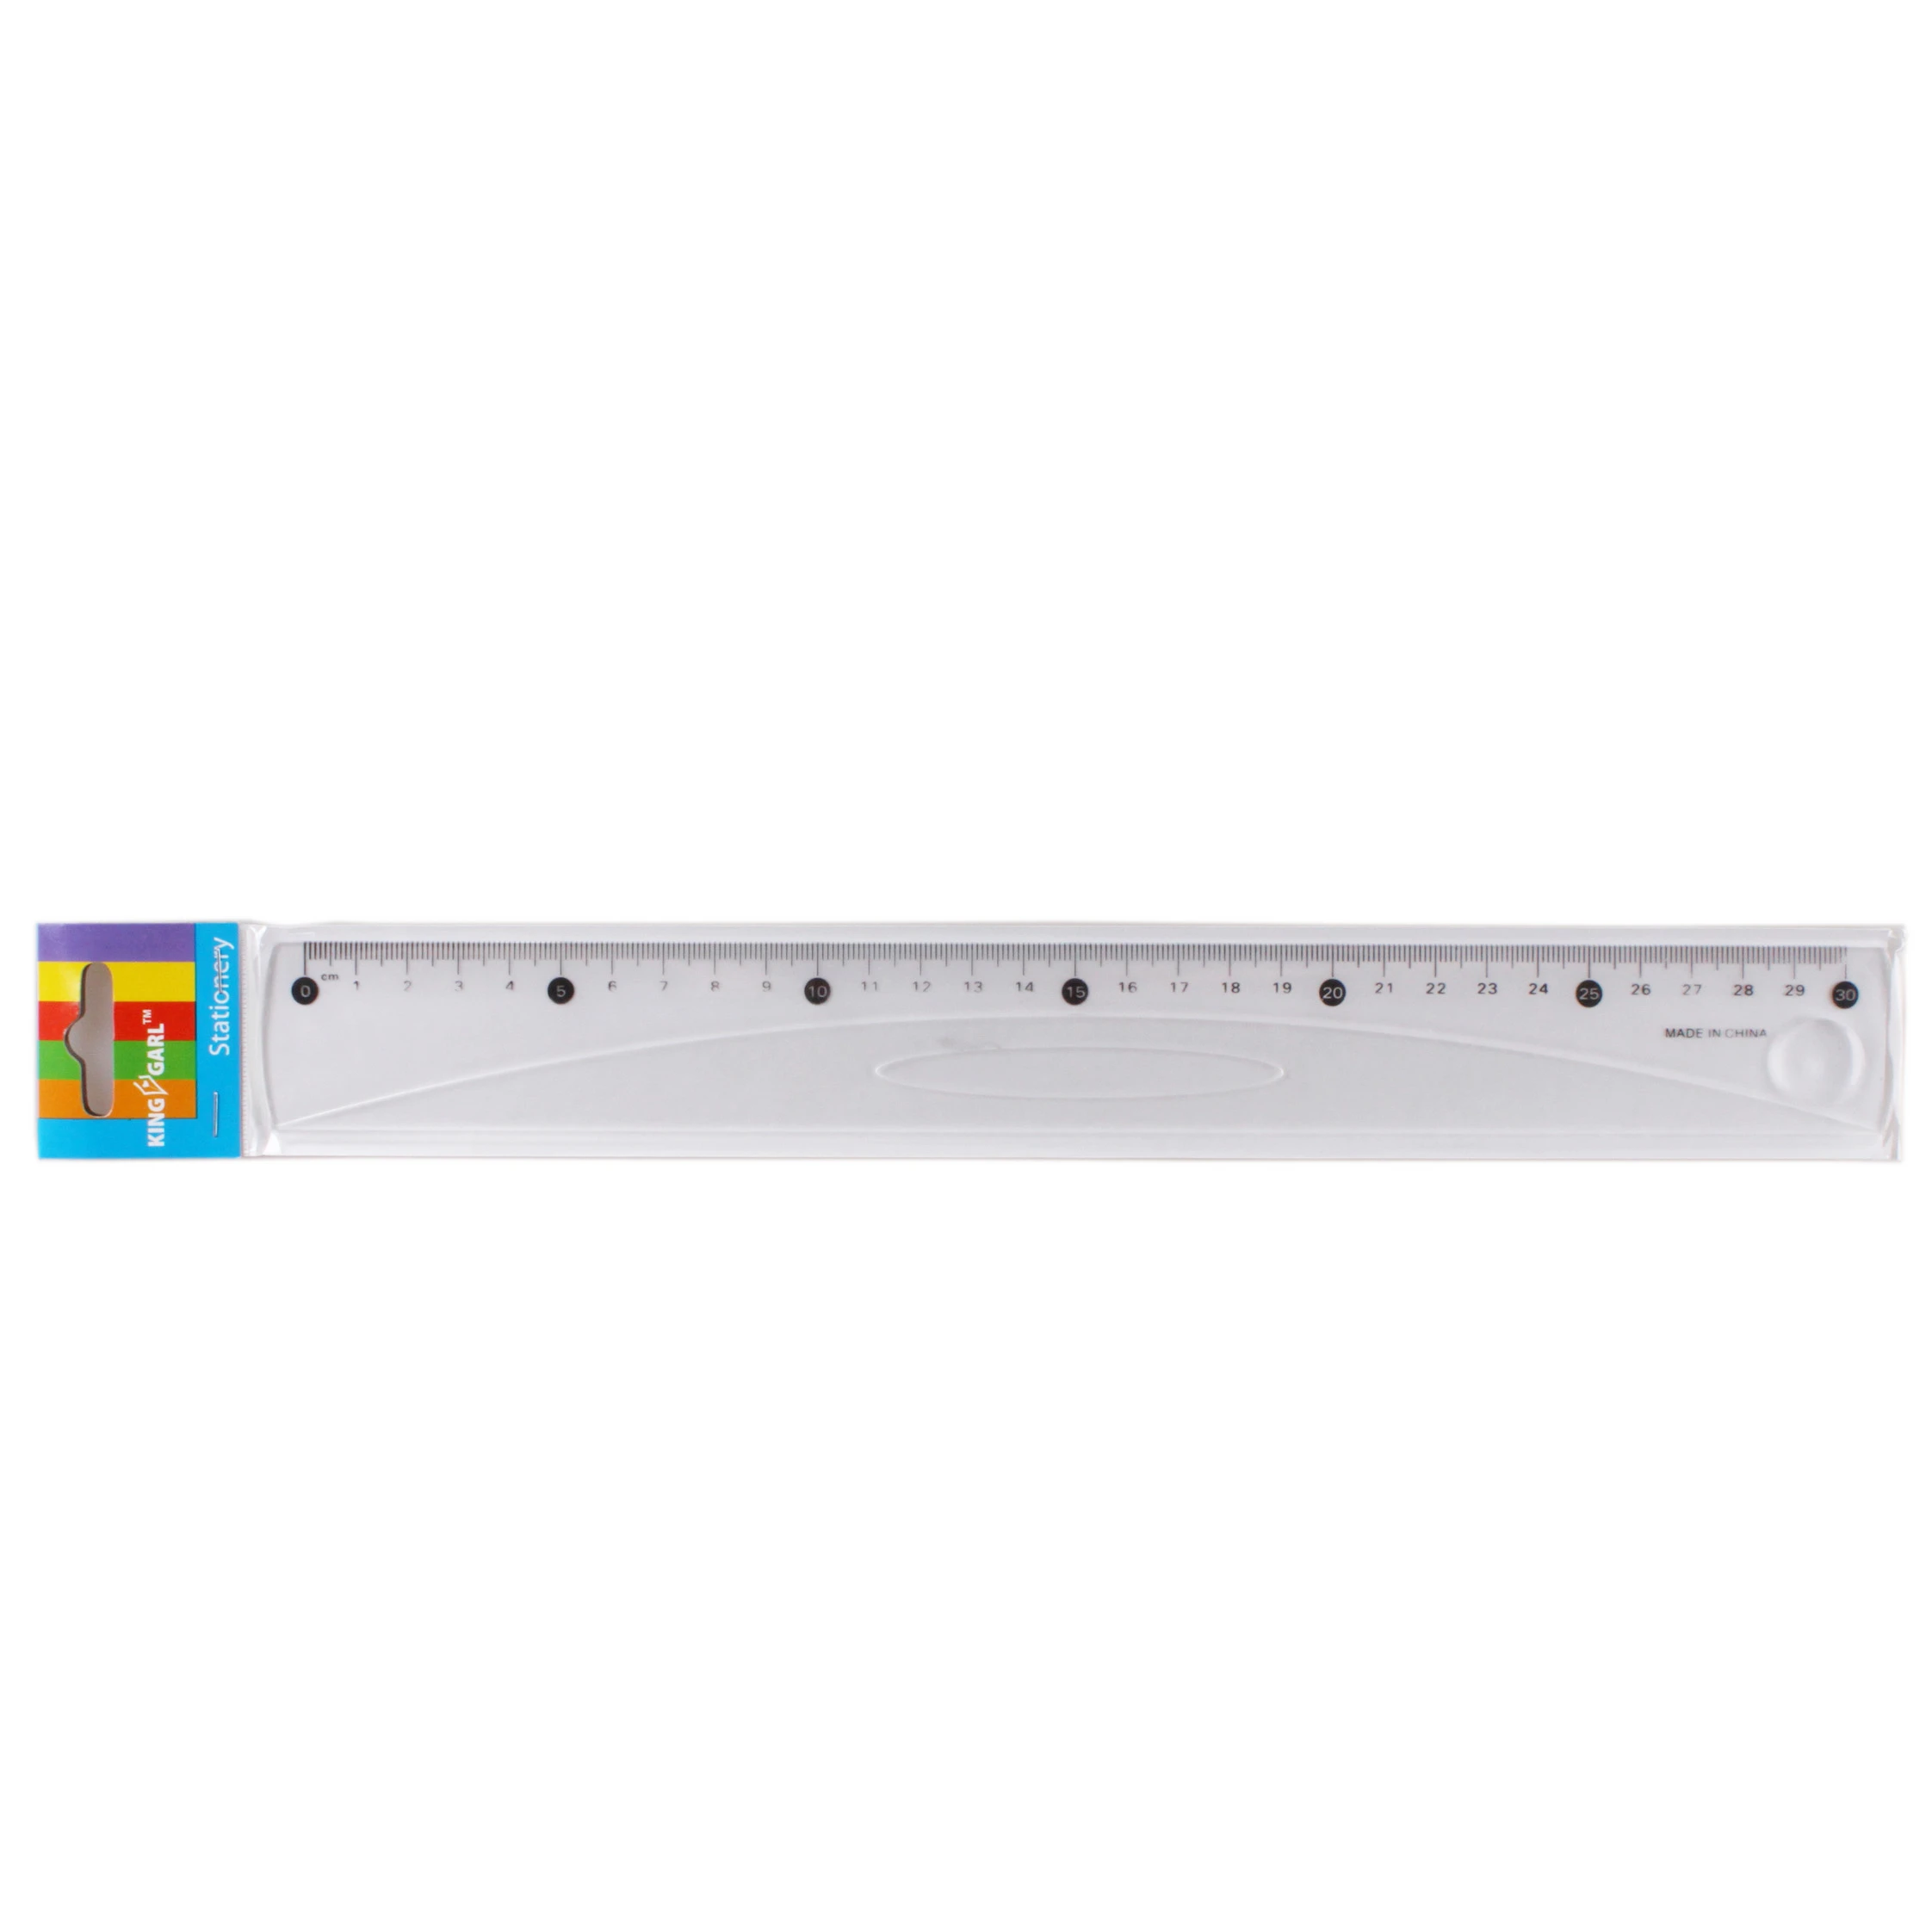 30 cm ruler 12 inch actual size mold ruler for office and school buy ruler for kids plastic ruler ruler and its uses product on alibaba com